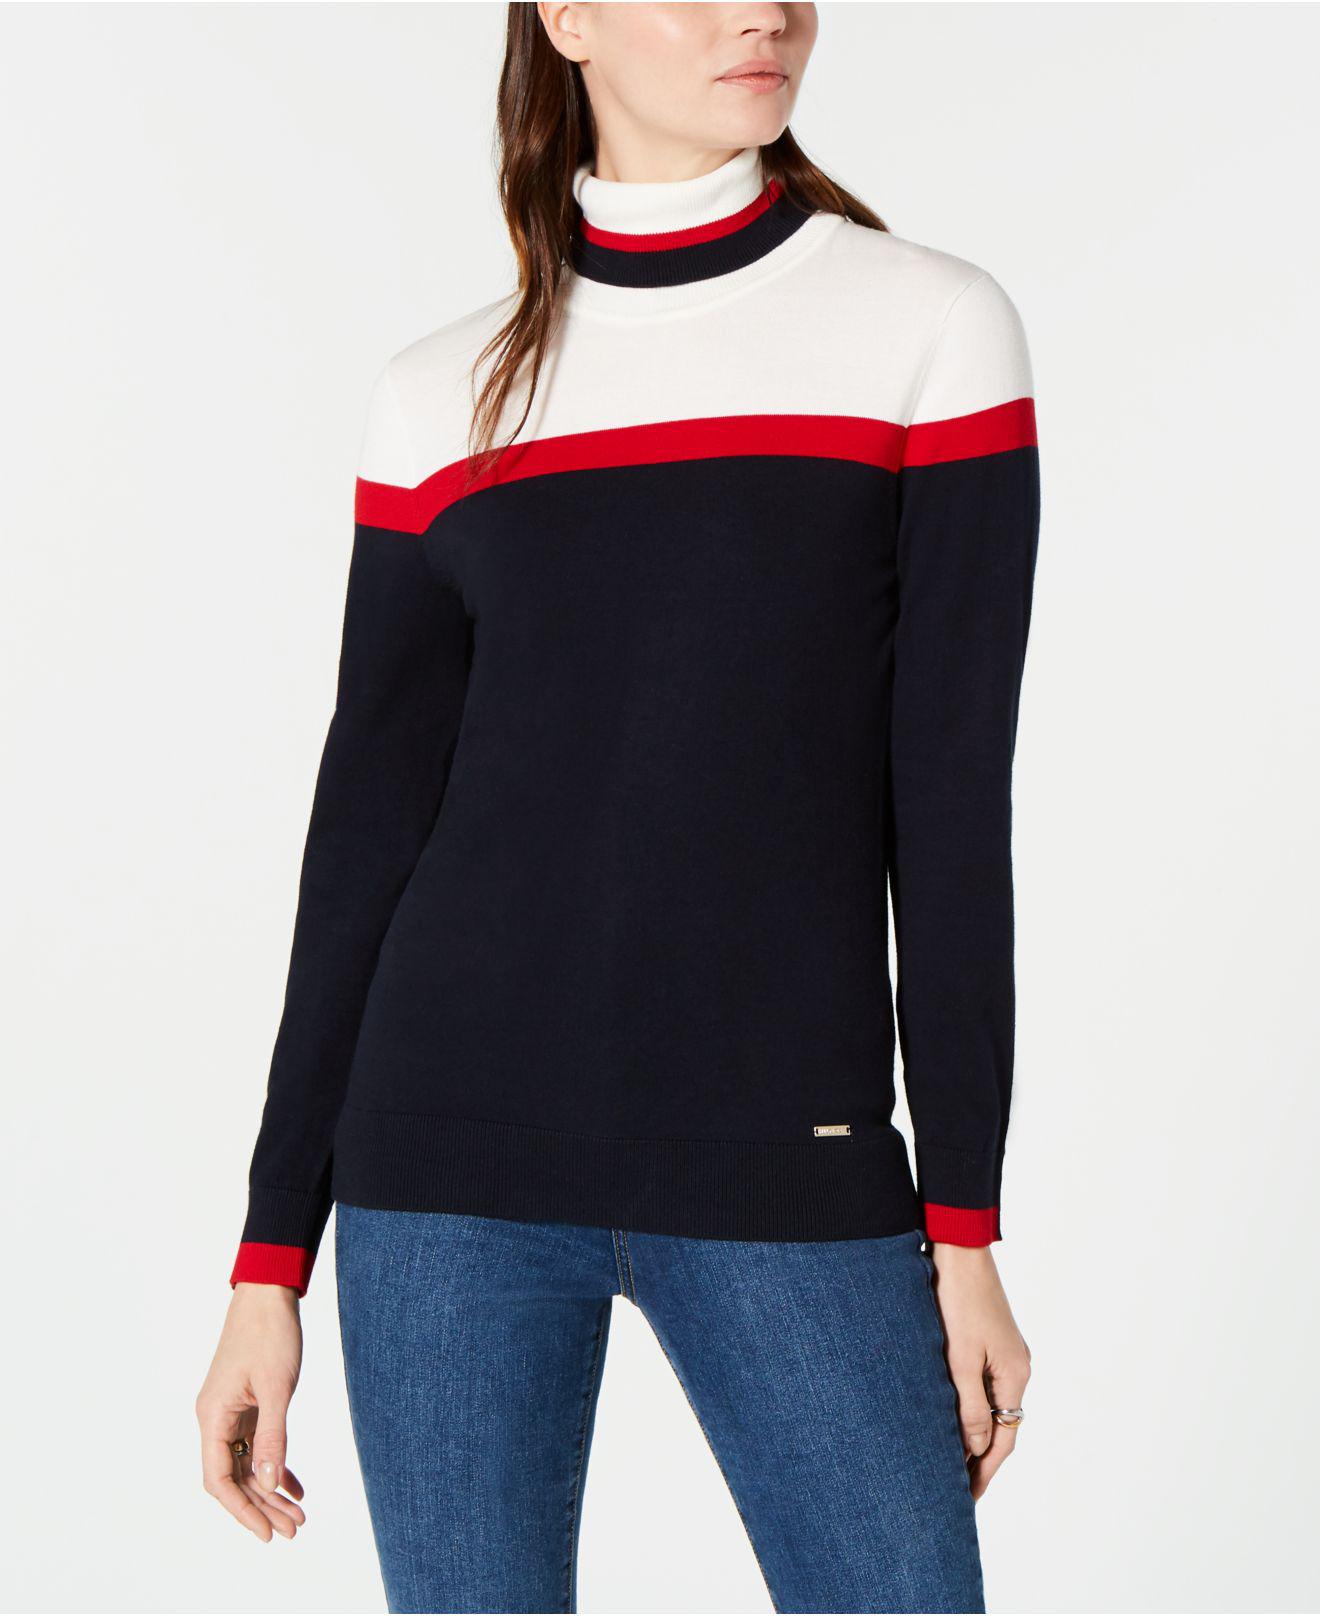 Tommy Hilfiger Perry Colorblocked Raglan Sleeve Sweater on Sale, SAVE 60%.